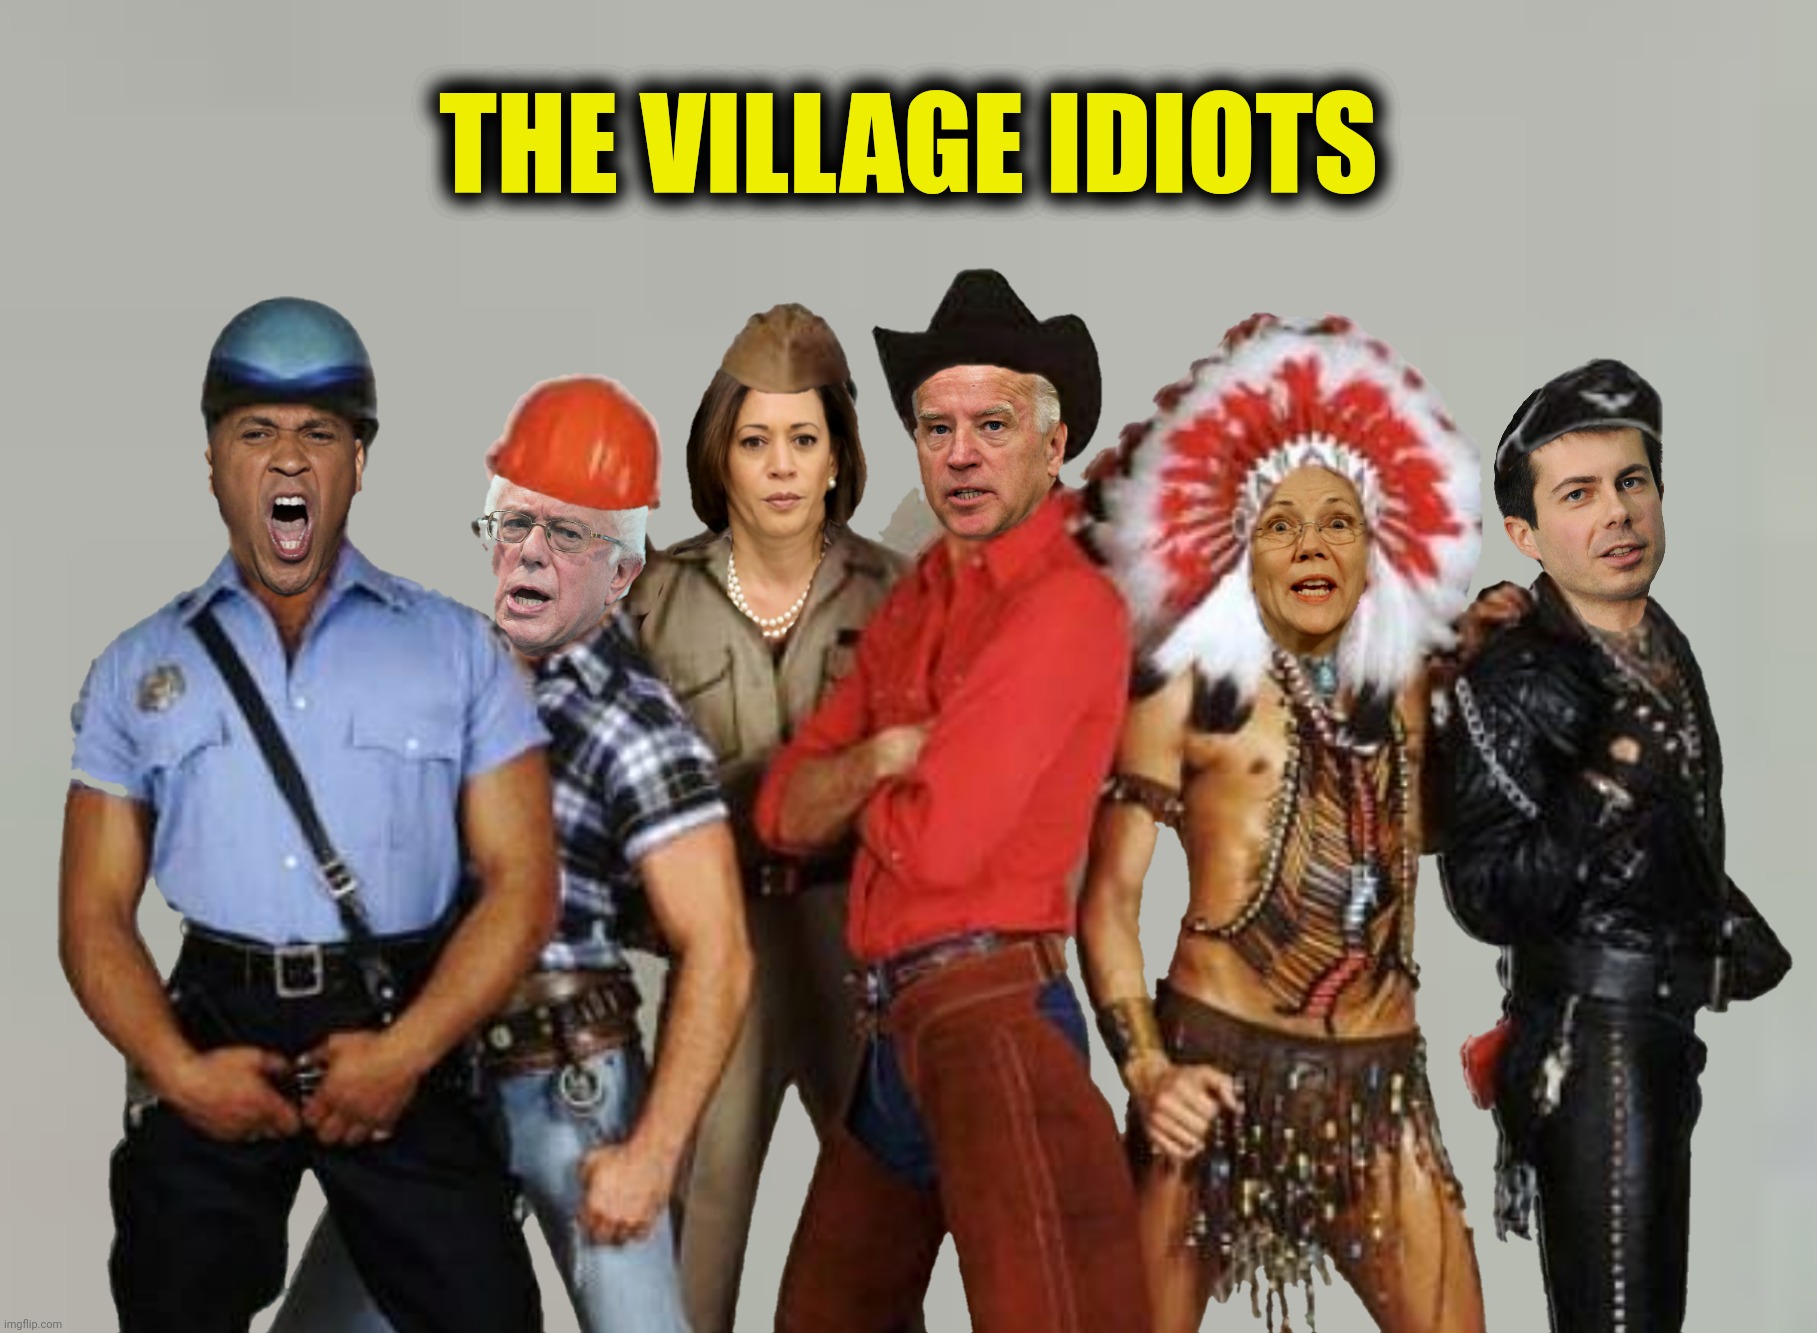 THE VILLAGE IDIOTS | made w/ Imgflip meme maker